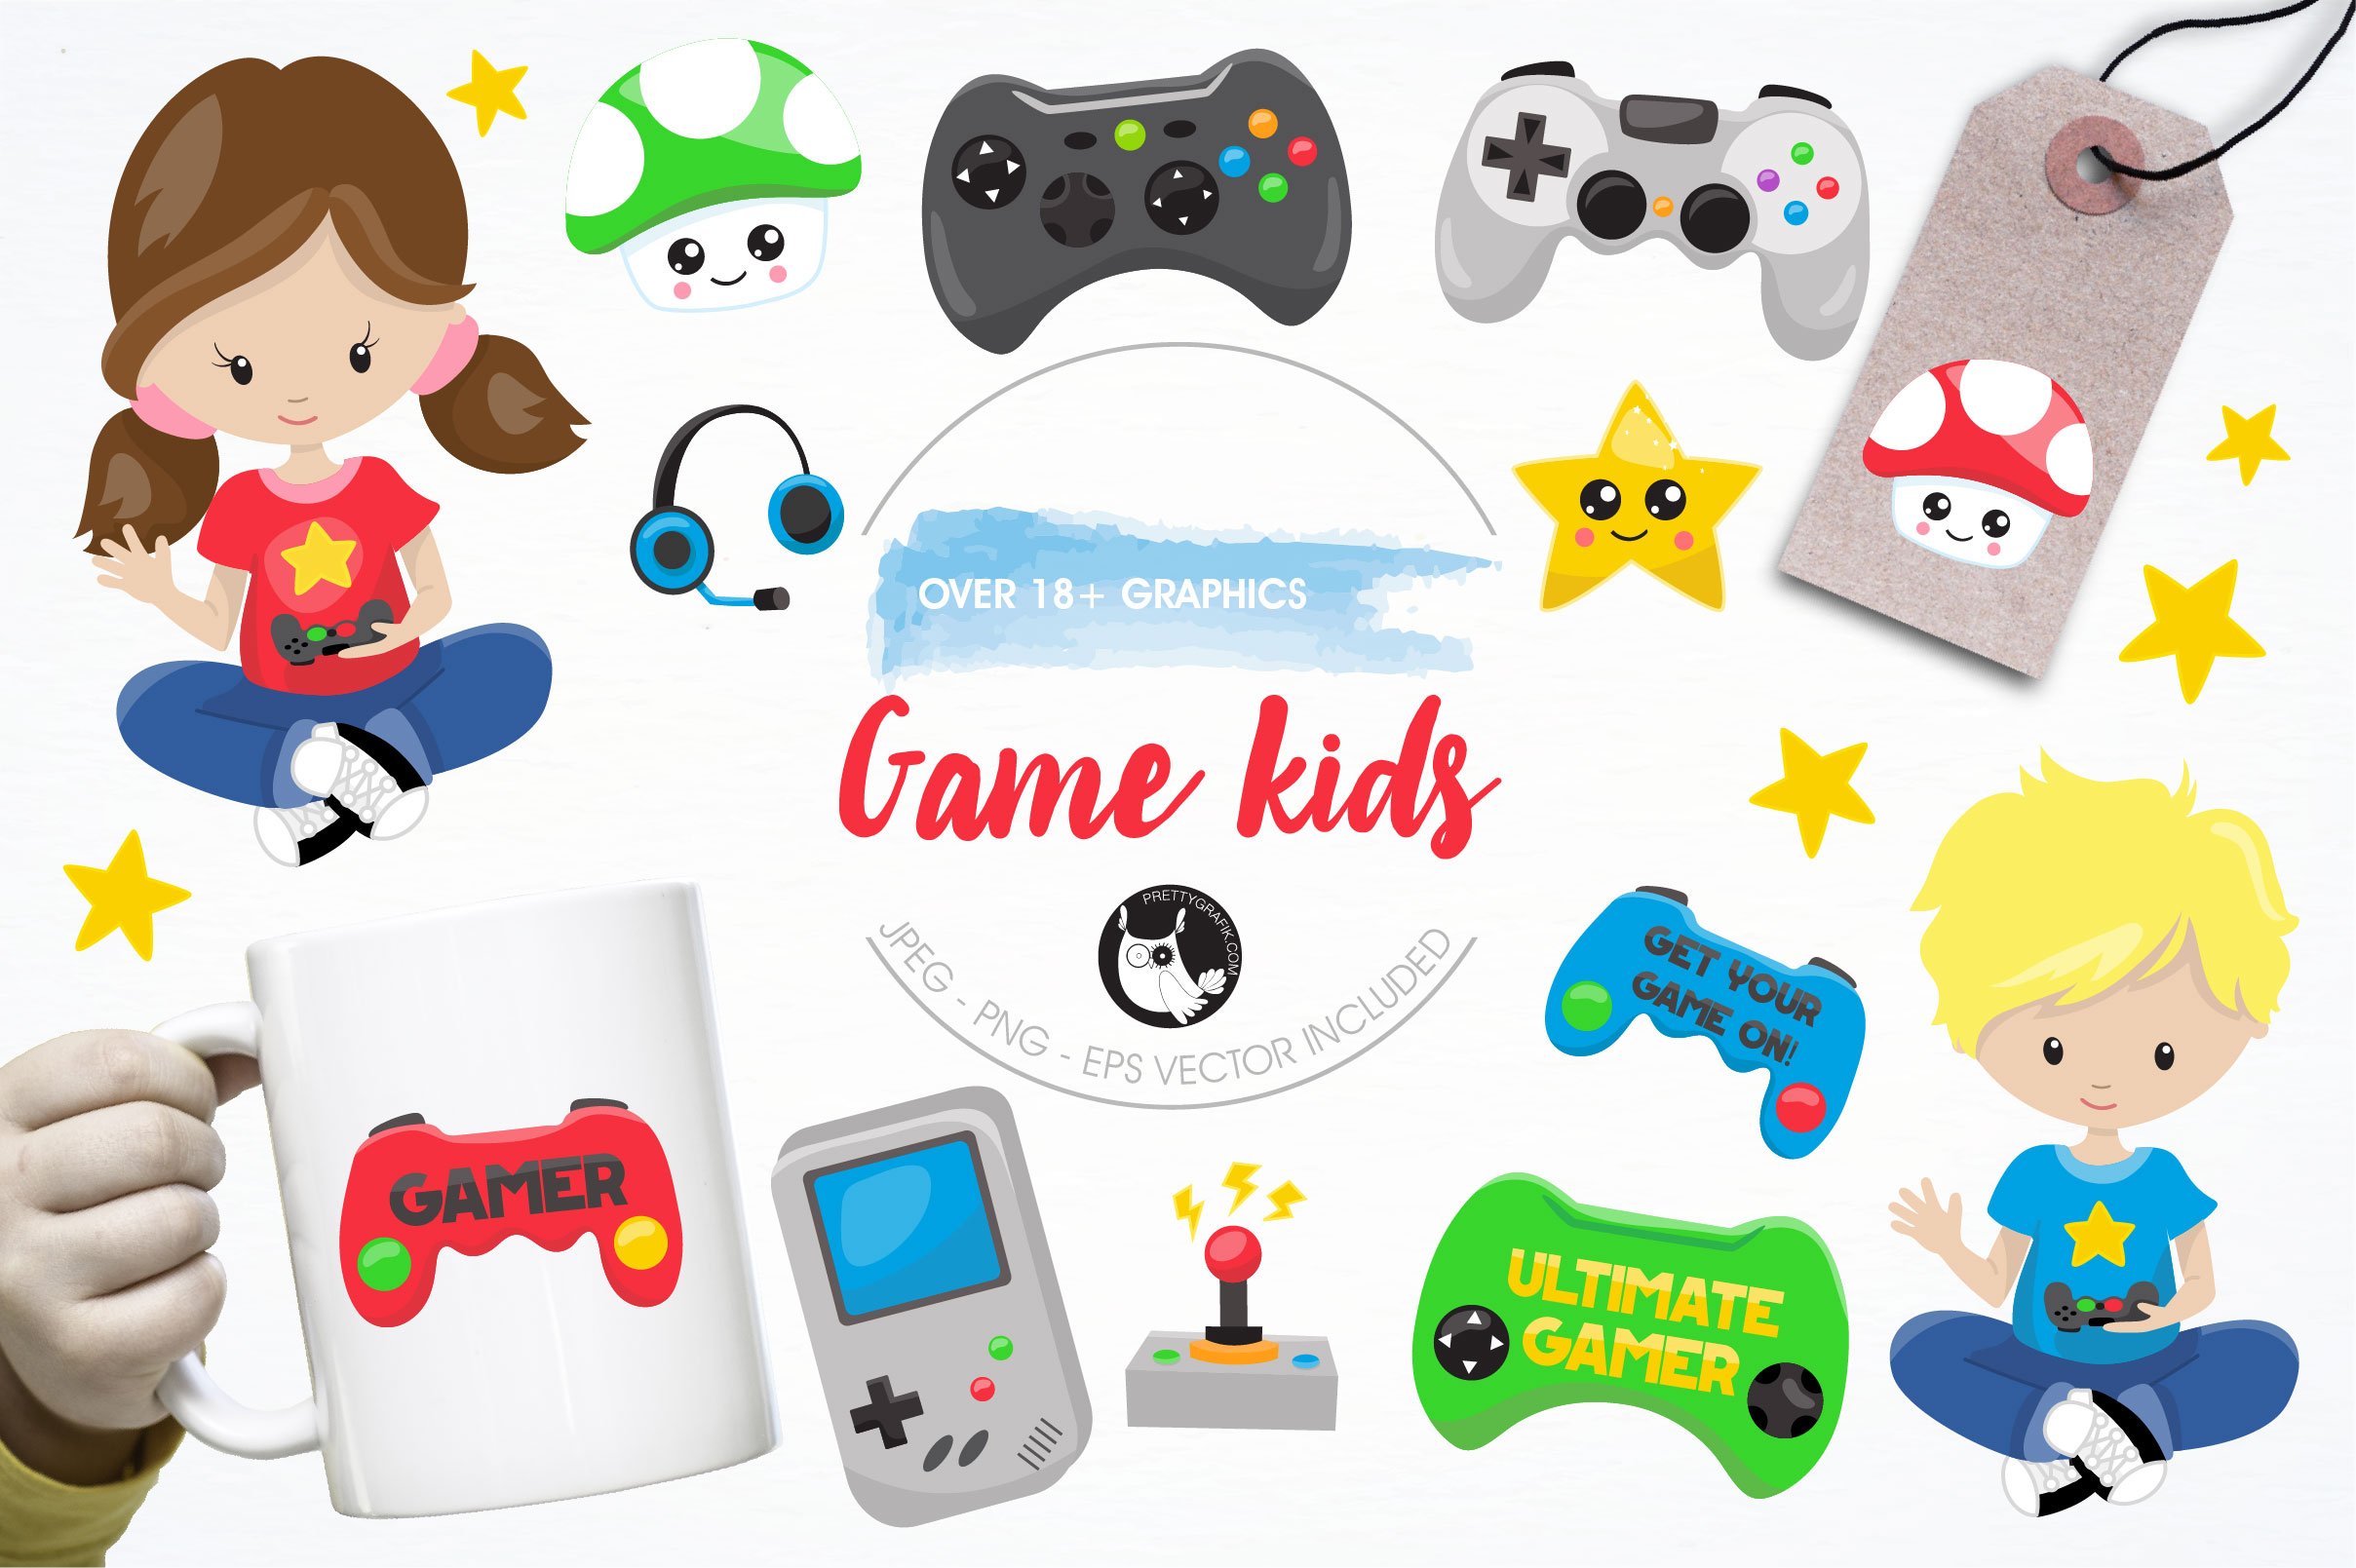 Game kids graphics and illustrations - Vector Image